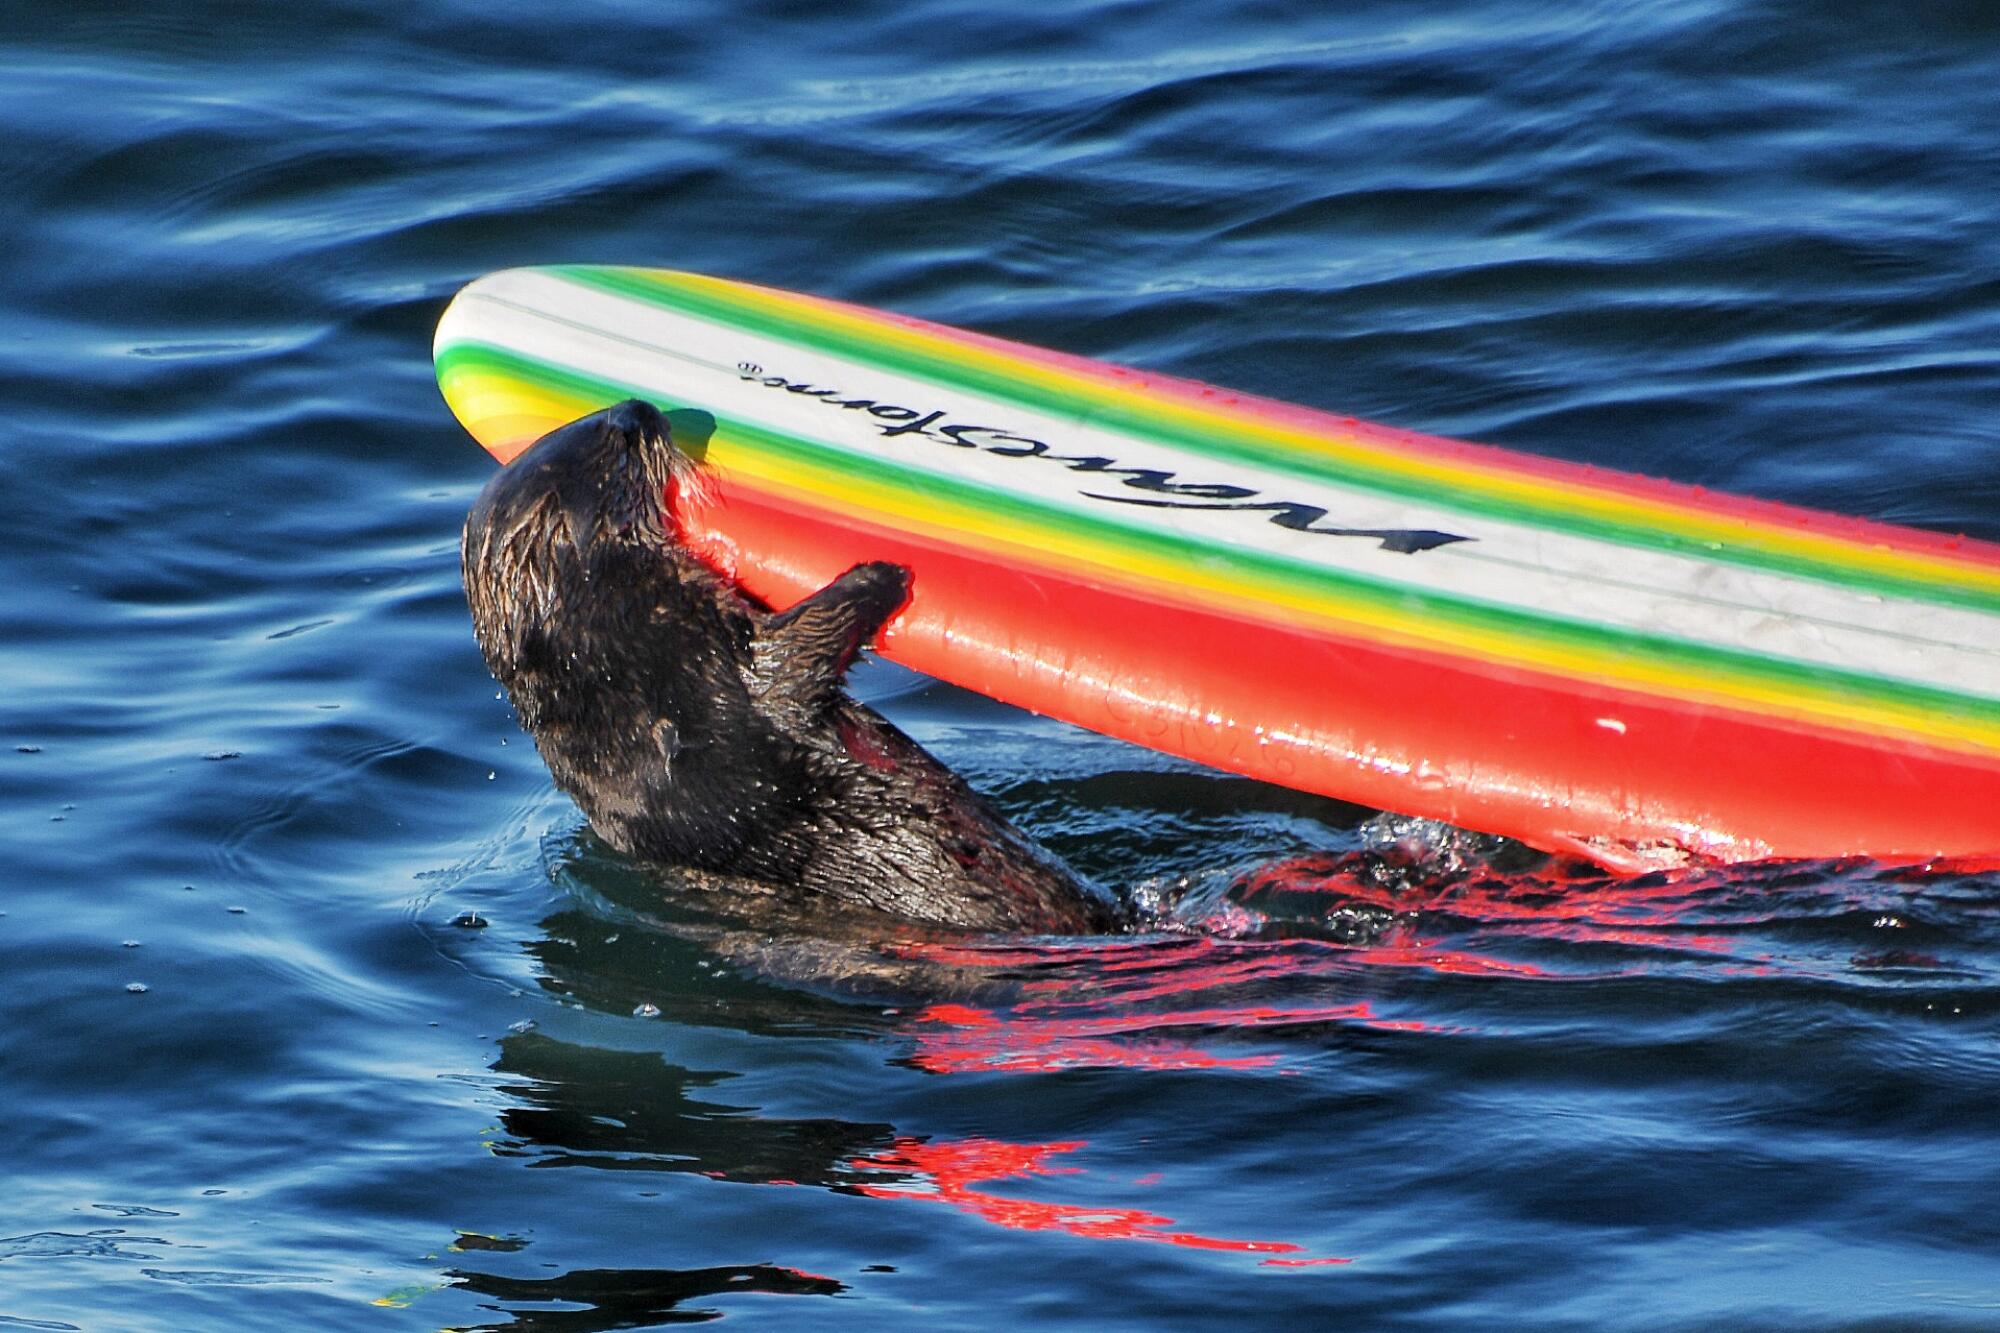 A sea otter bites a brightly colored surfboard.